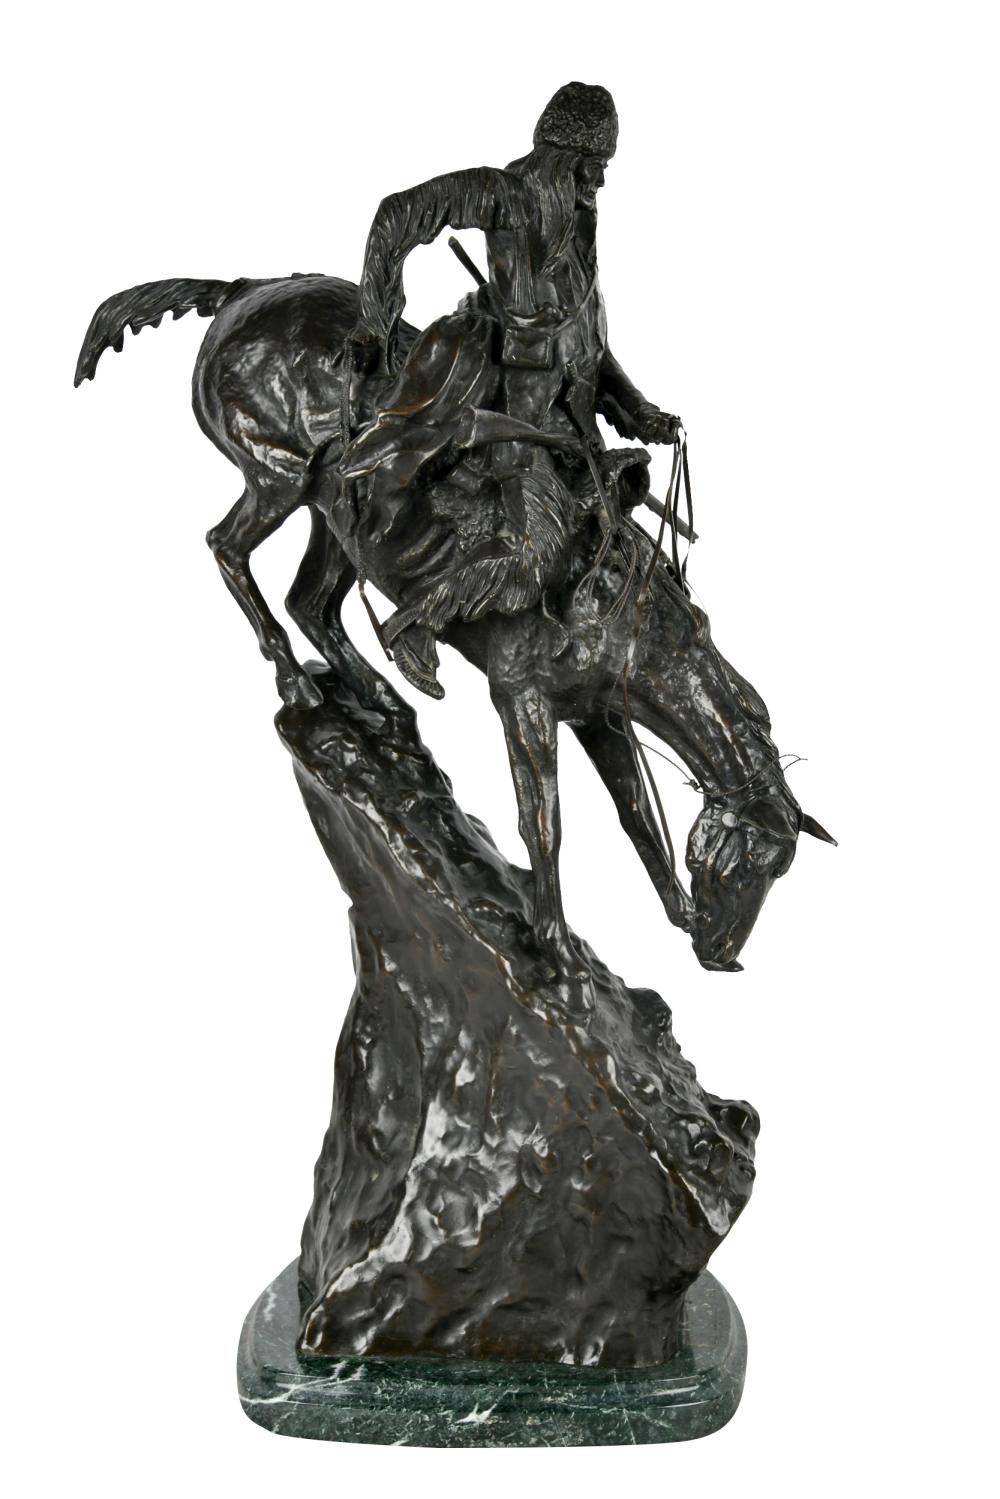 AFTER FREDERIC REMINGTON (1861 - 1909):